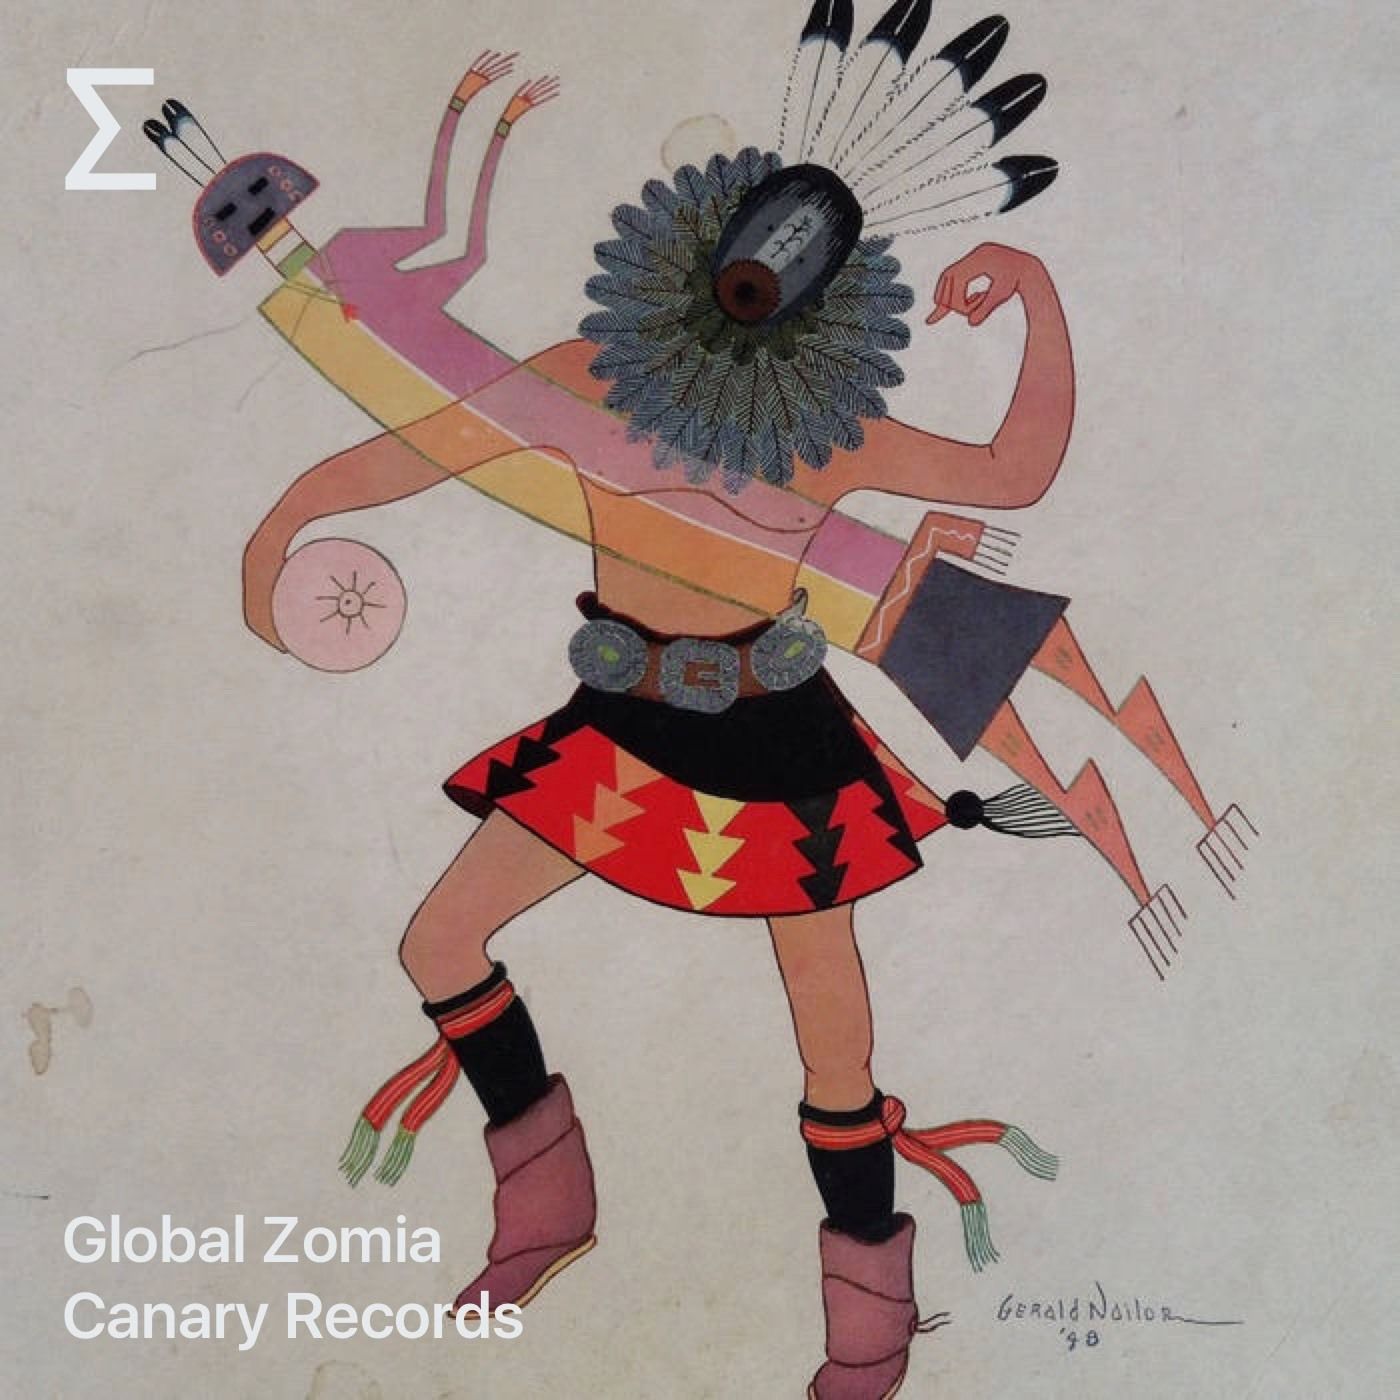 Global Zomia – Canary Records